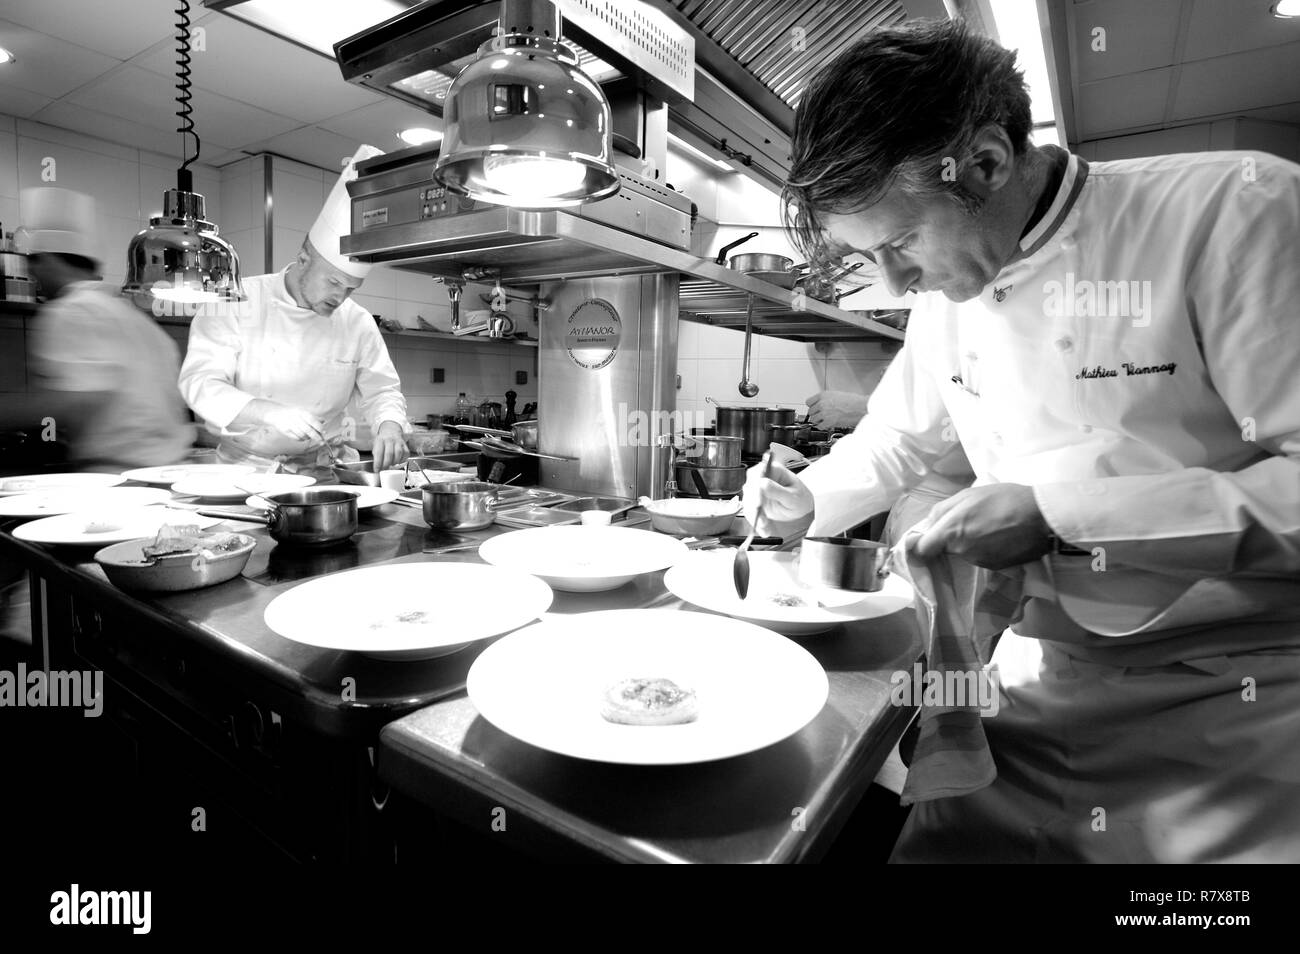 France, Rhone, Lyon, restaurant Mere Brazier of chef Mathieu Viannay, atmosphere in the kitchen Stock Photo